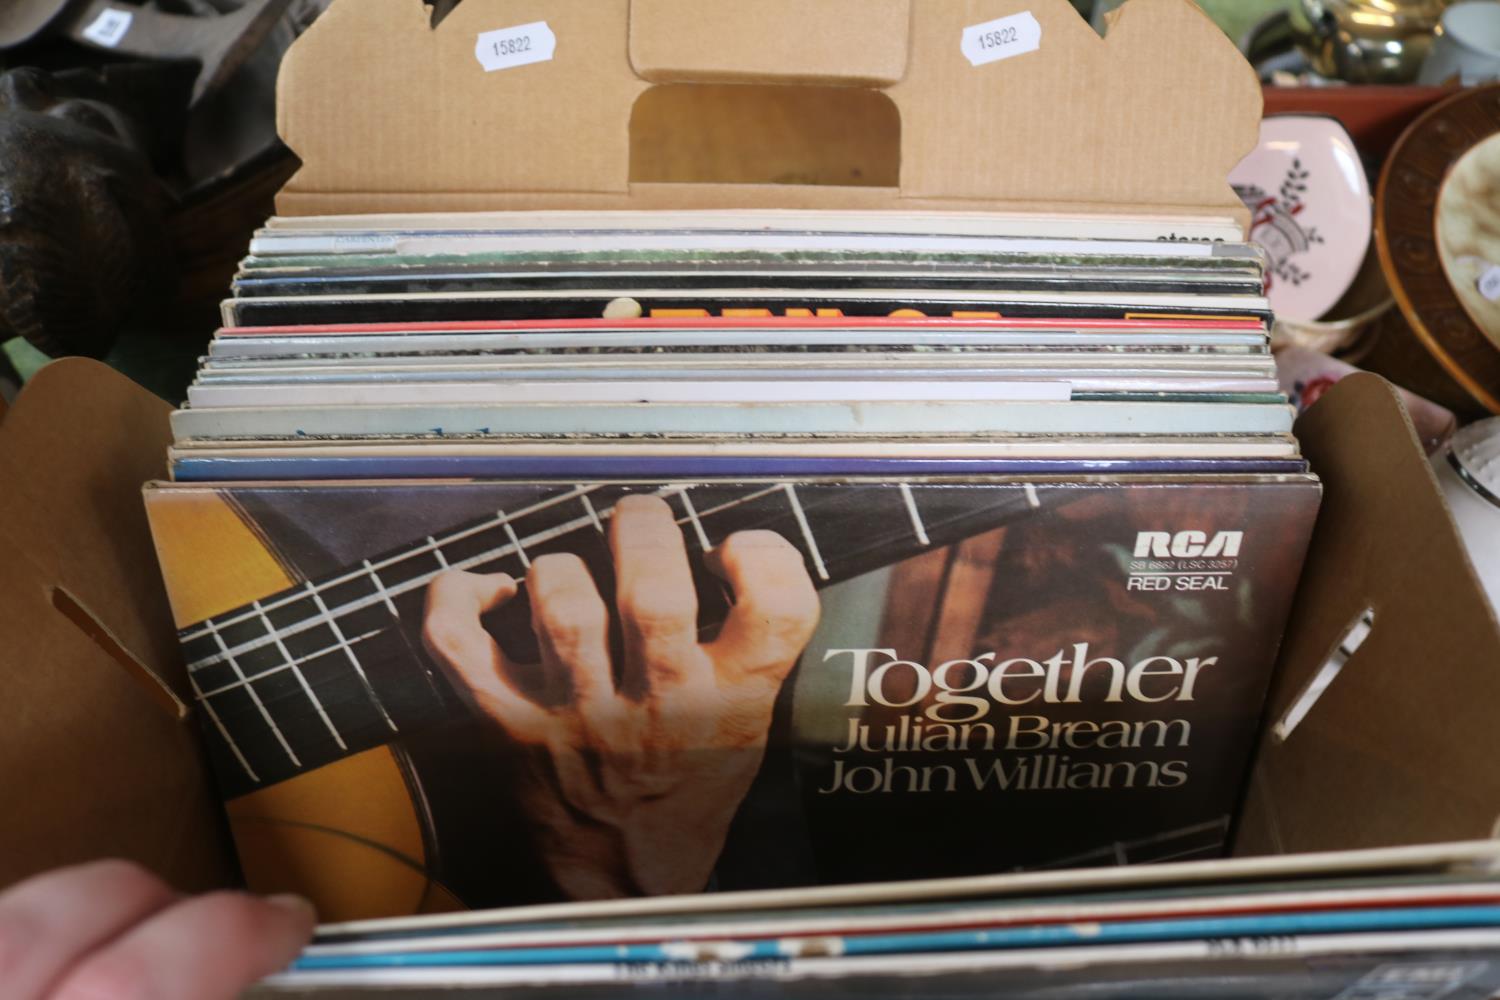 Collection of Vinyl Records to include the Carpenters, Simon & Garfunkel etc - Image 2 of 4